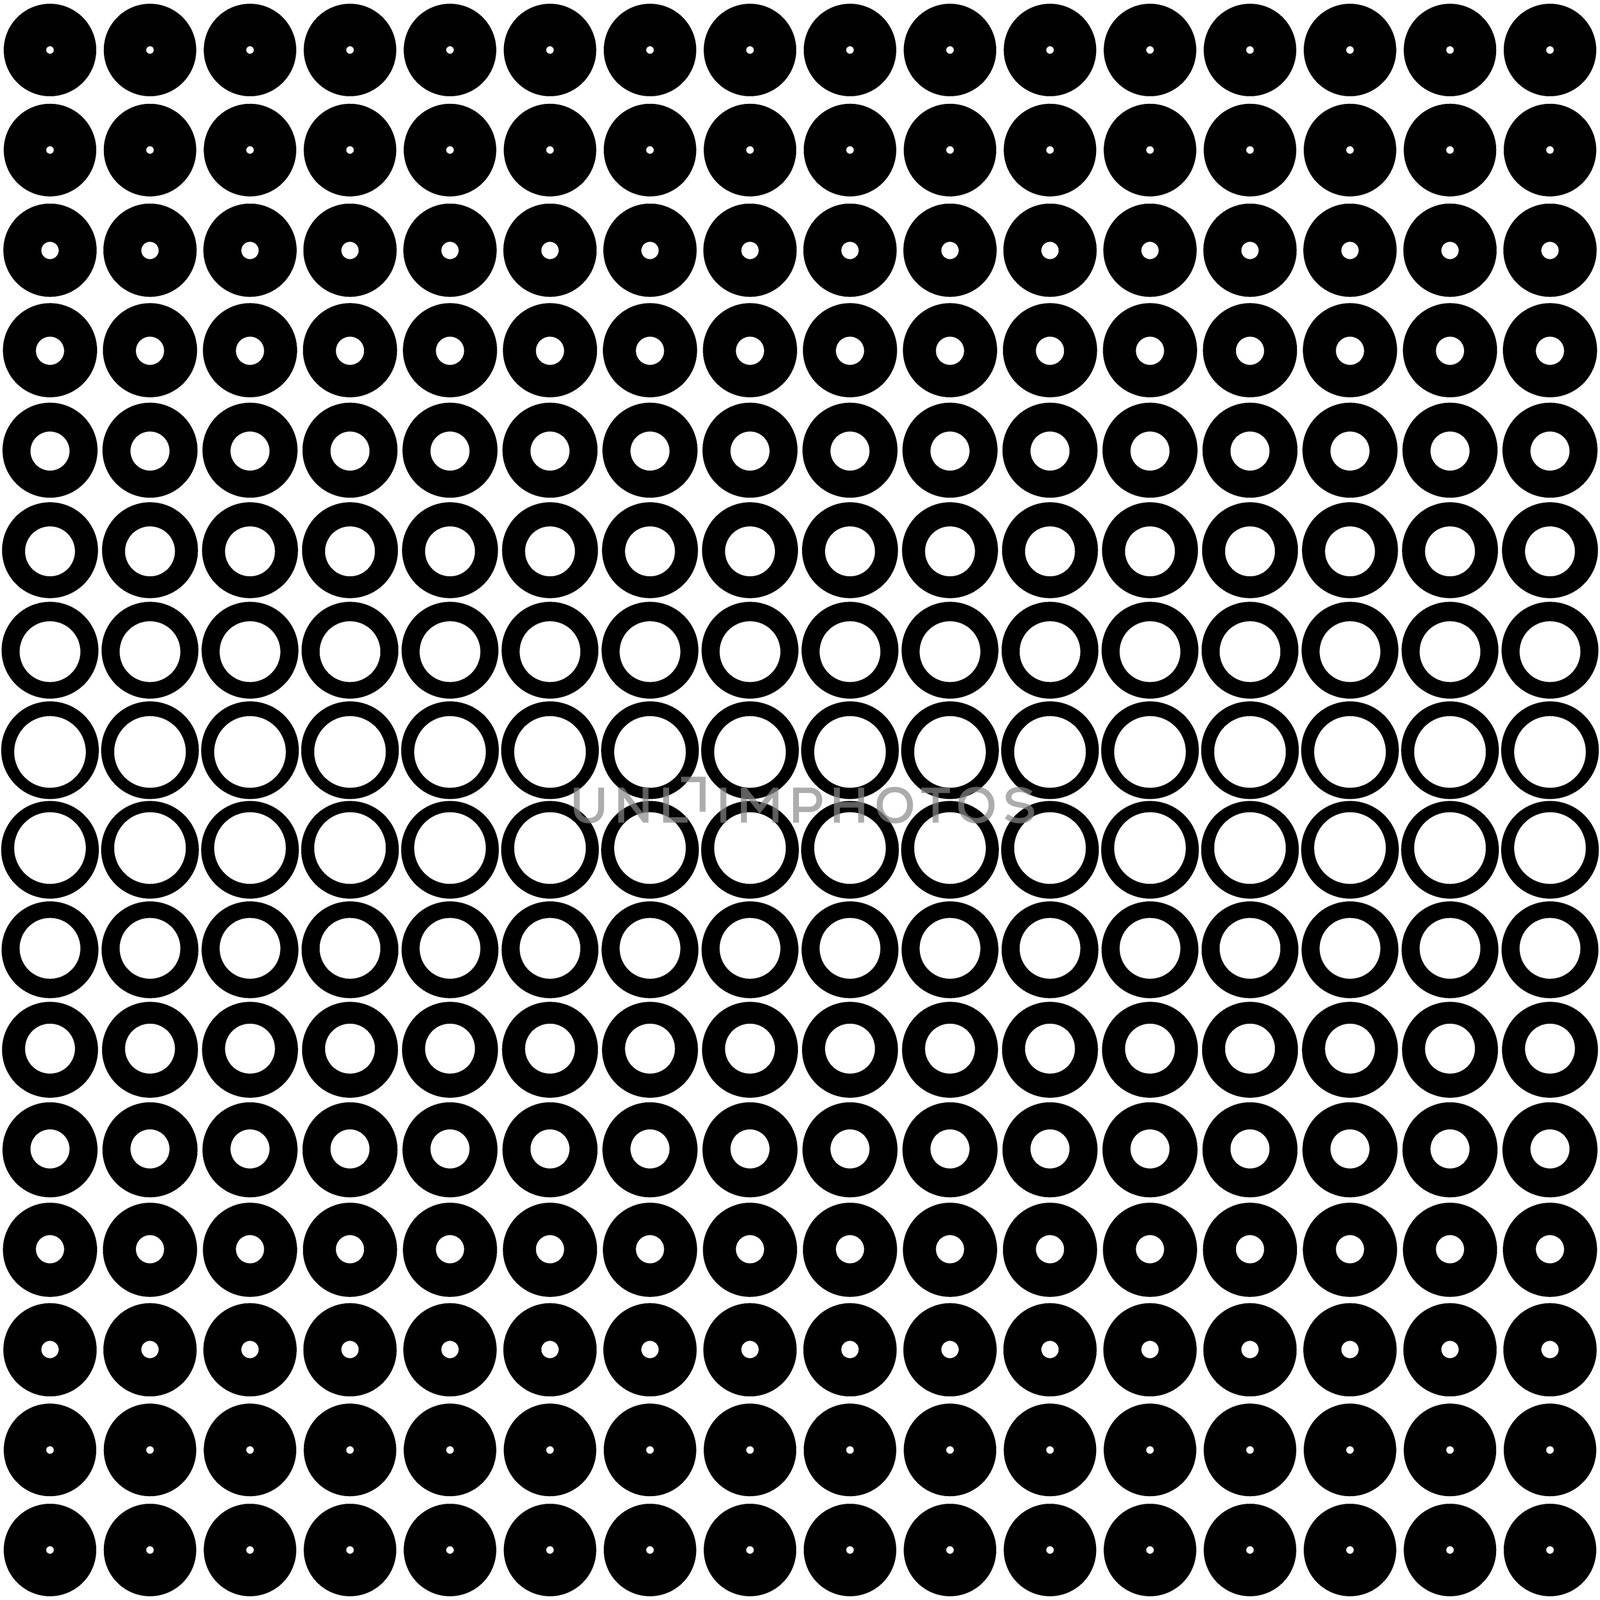 black and white dots pattern by weknow